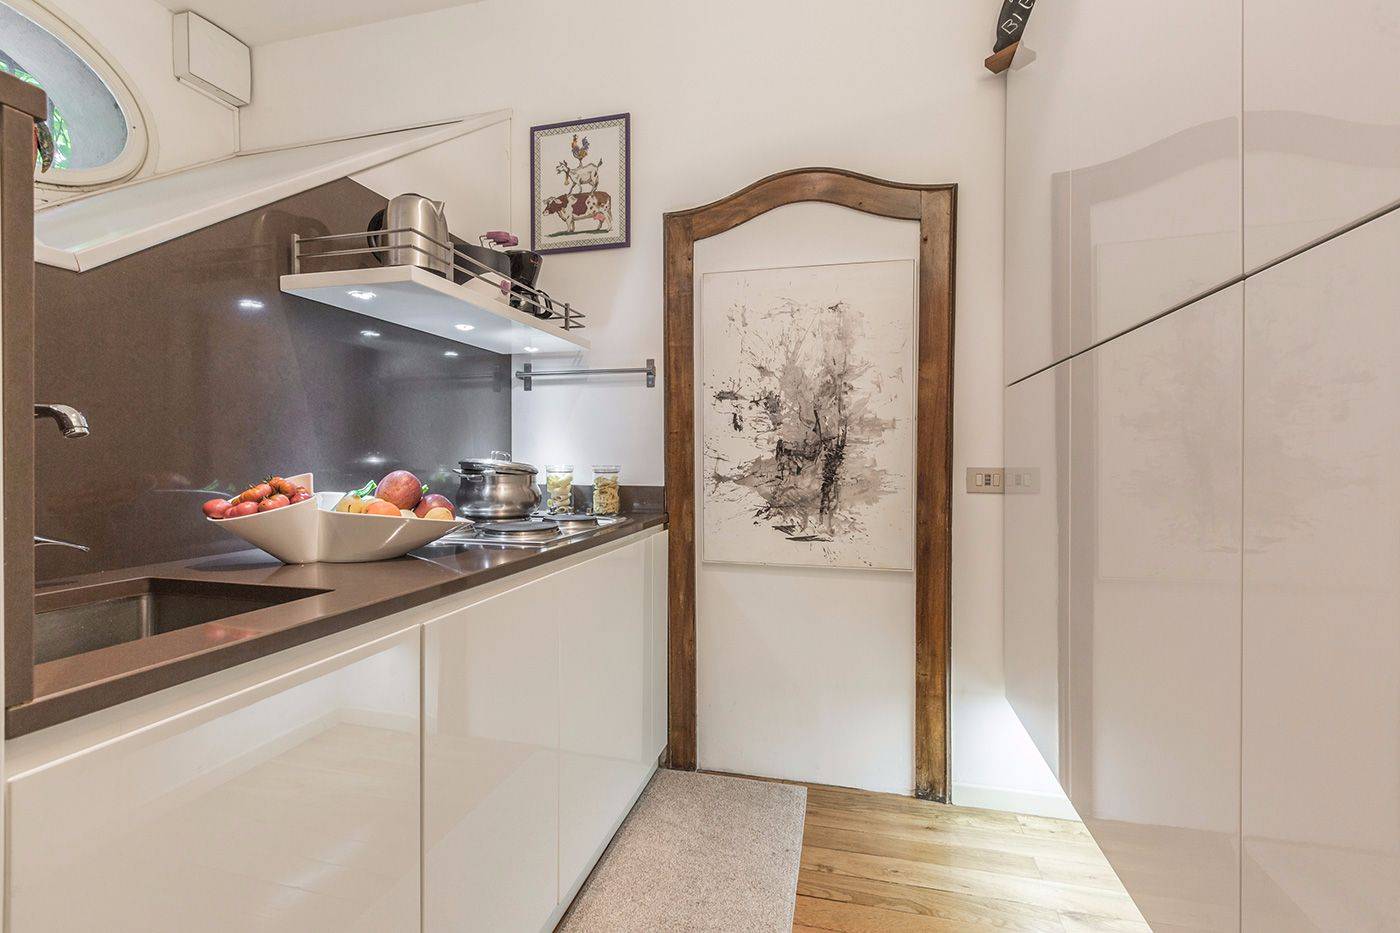 the kitchen has plenty of spacious cupboards on the right and the appliances on the left